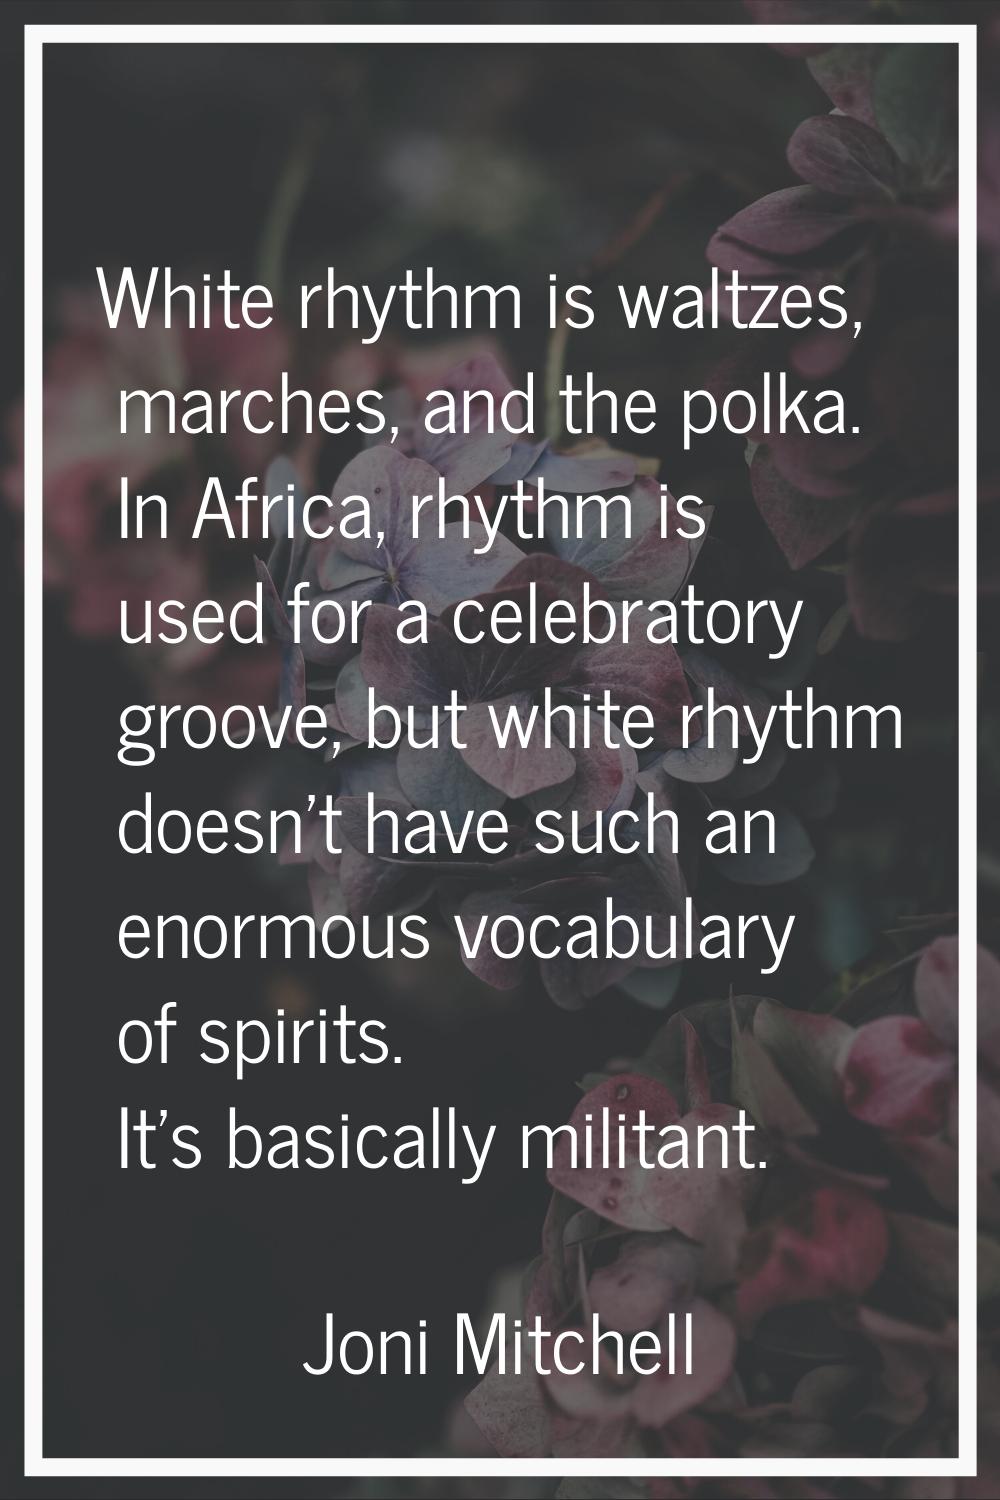 White rhythm is waltzes, marches, and the polka. In Africa, rhythm is used for a celebratory groove